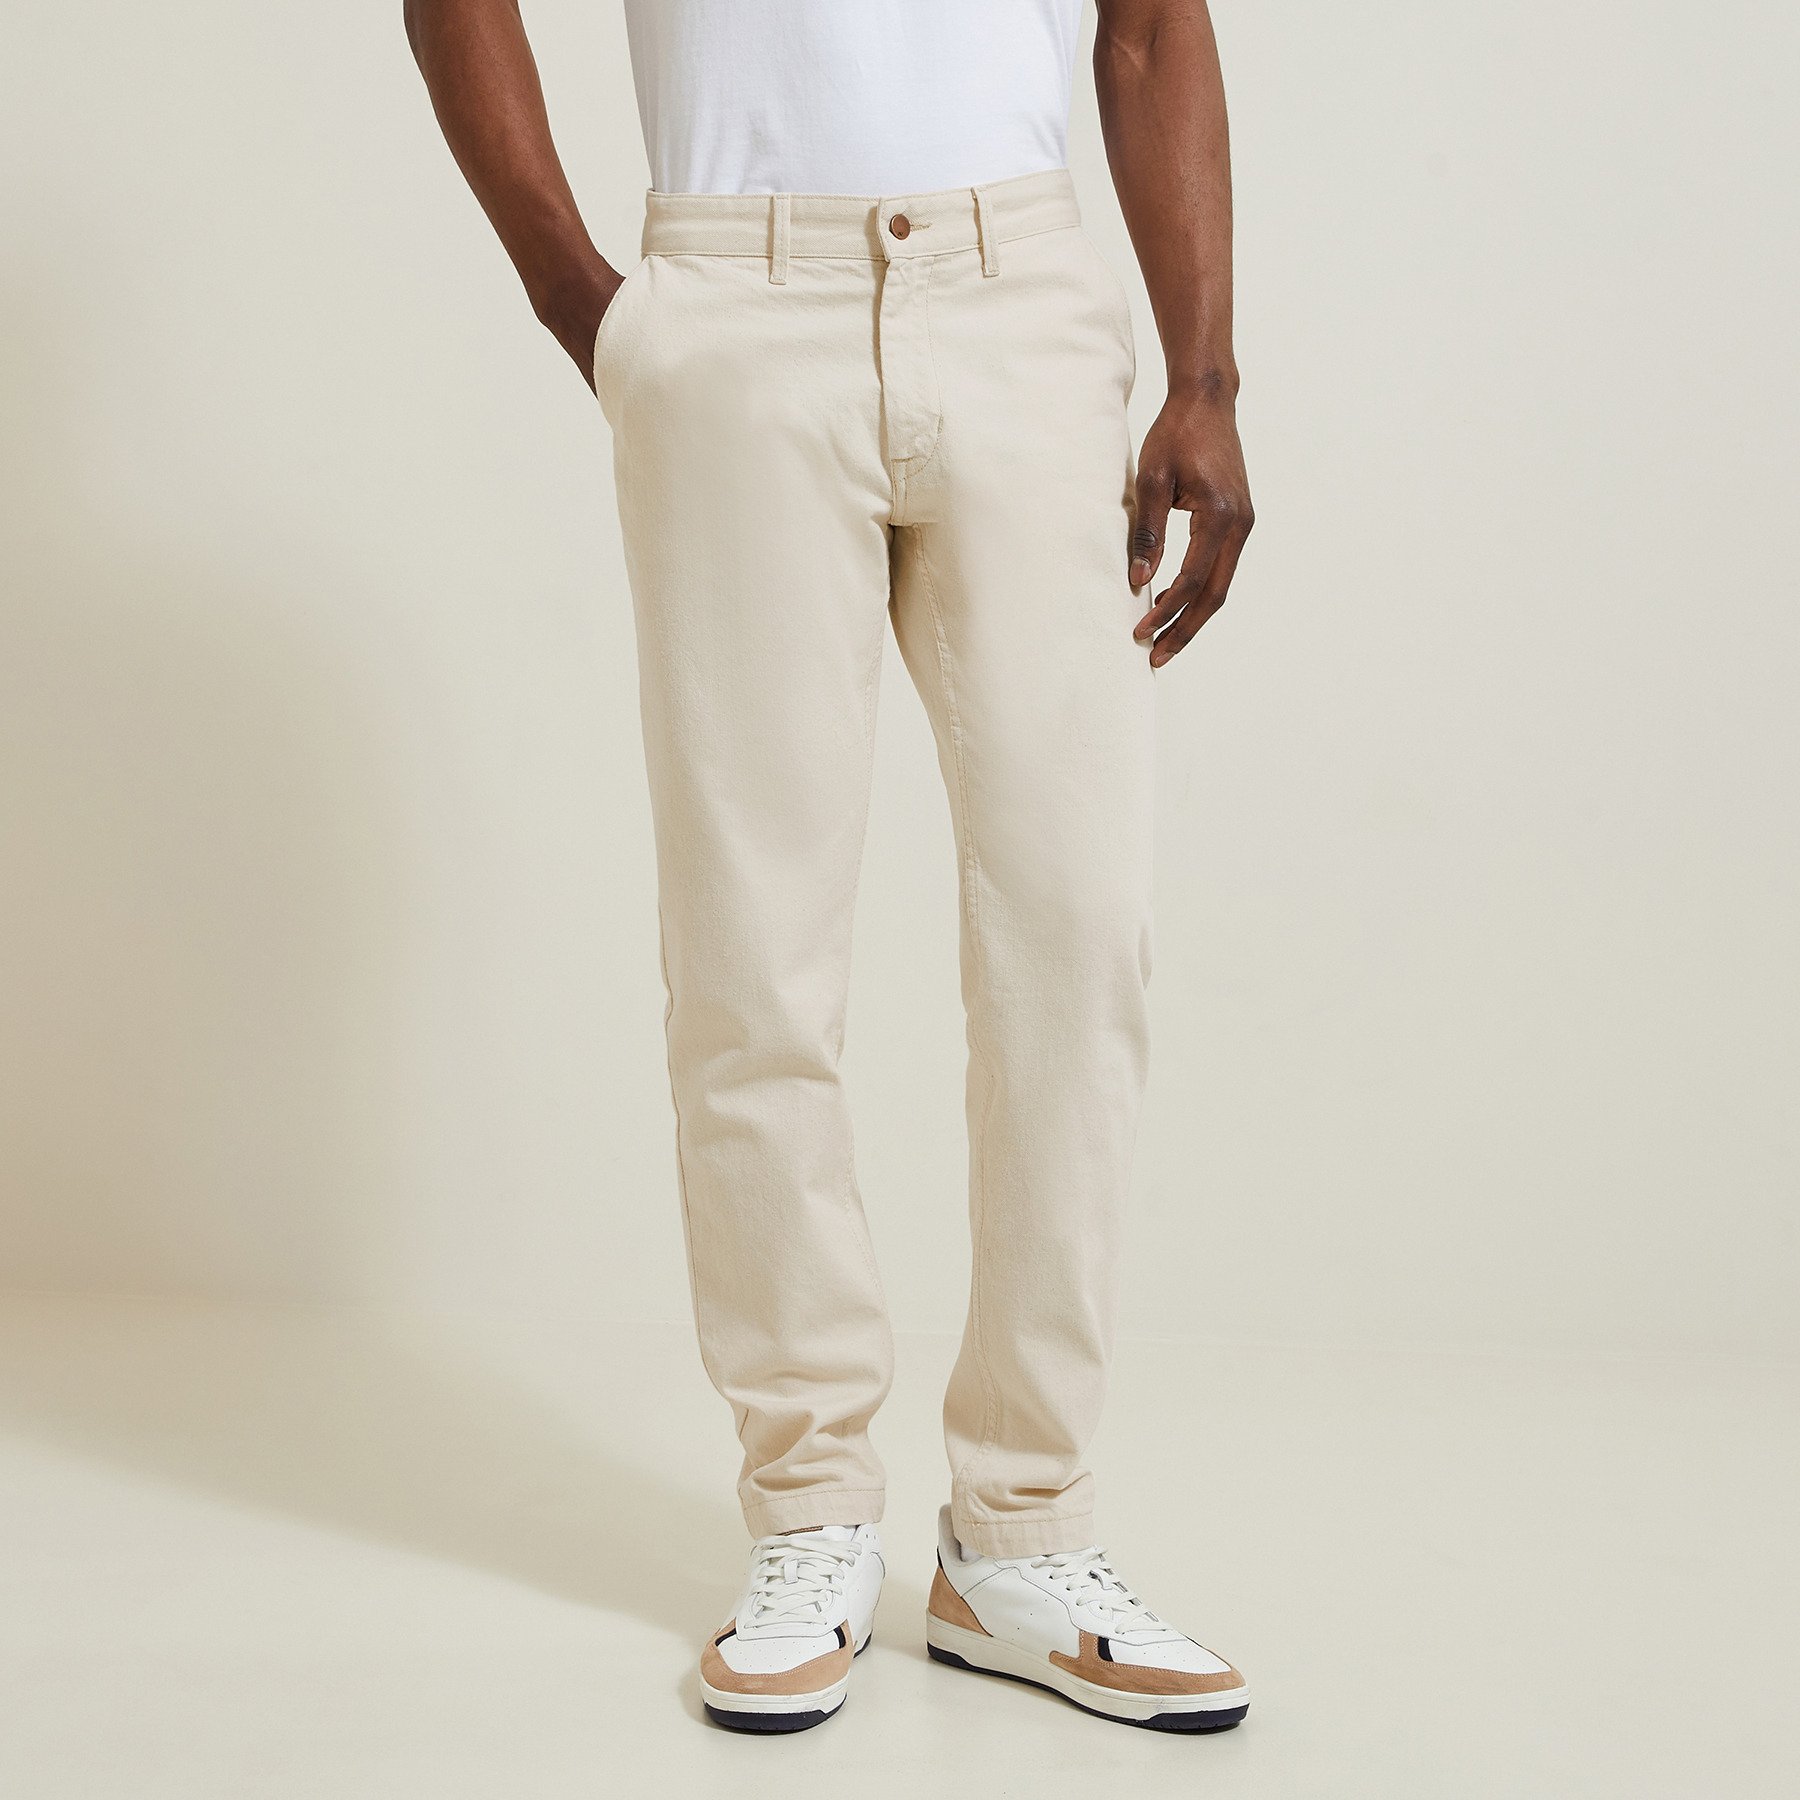 Jean forme chino Blanc 36 100% Coton Homme Jules